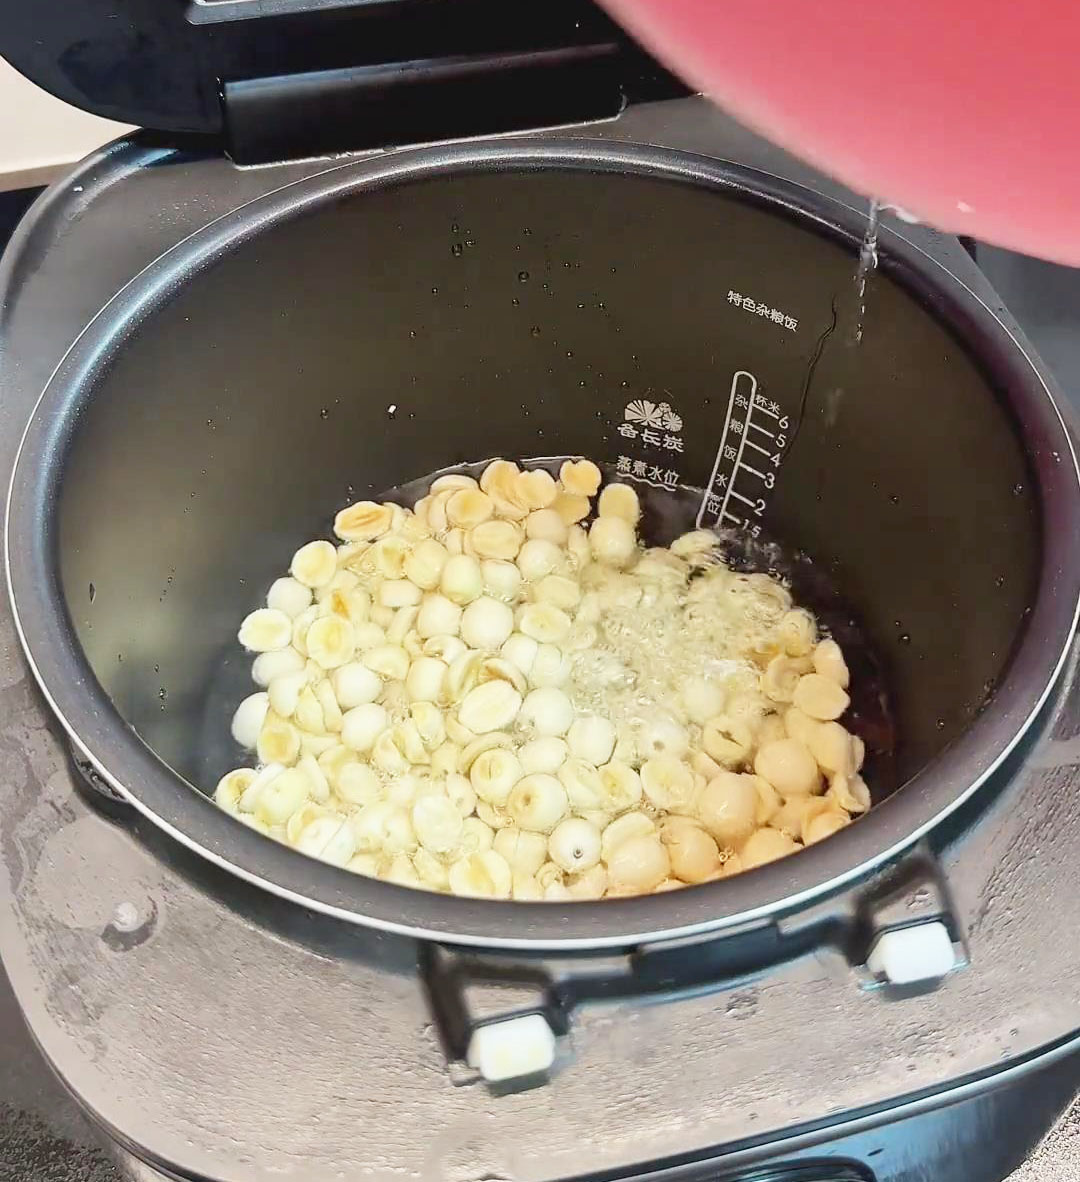 place the lotus seeds in a rice cooker and add enough water to submerge them